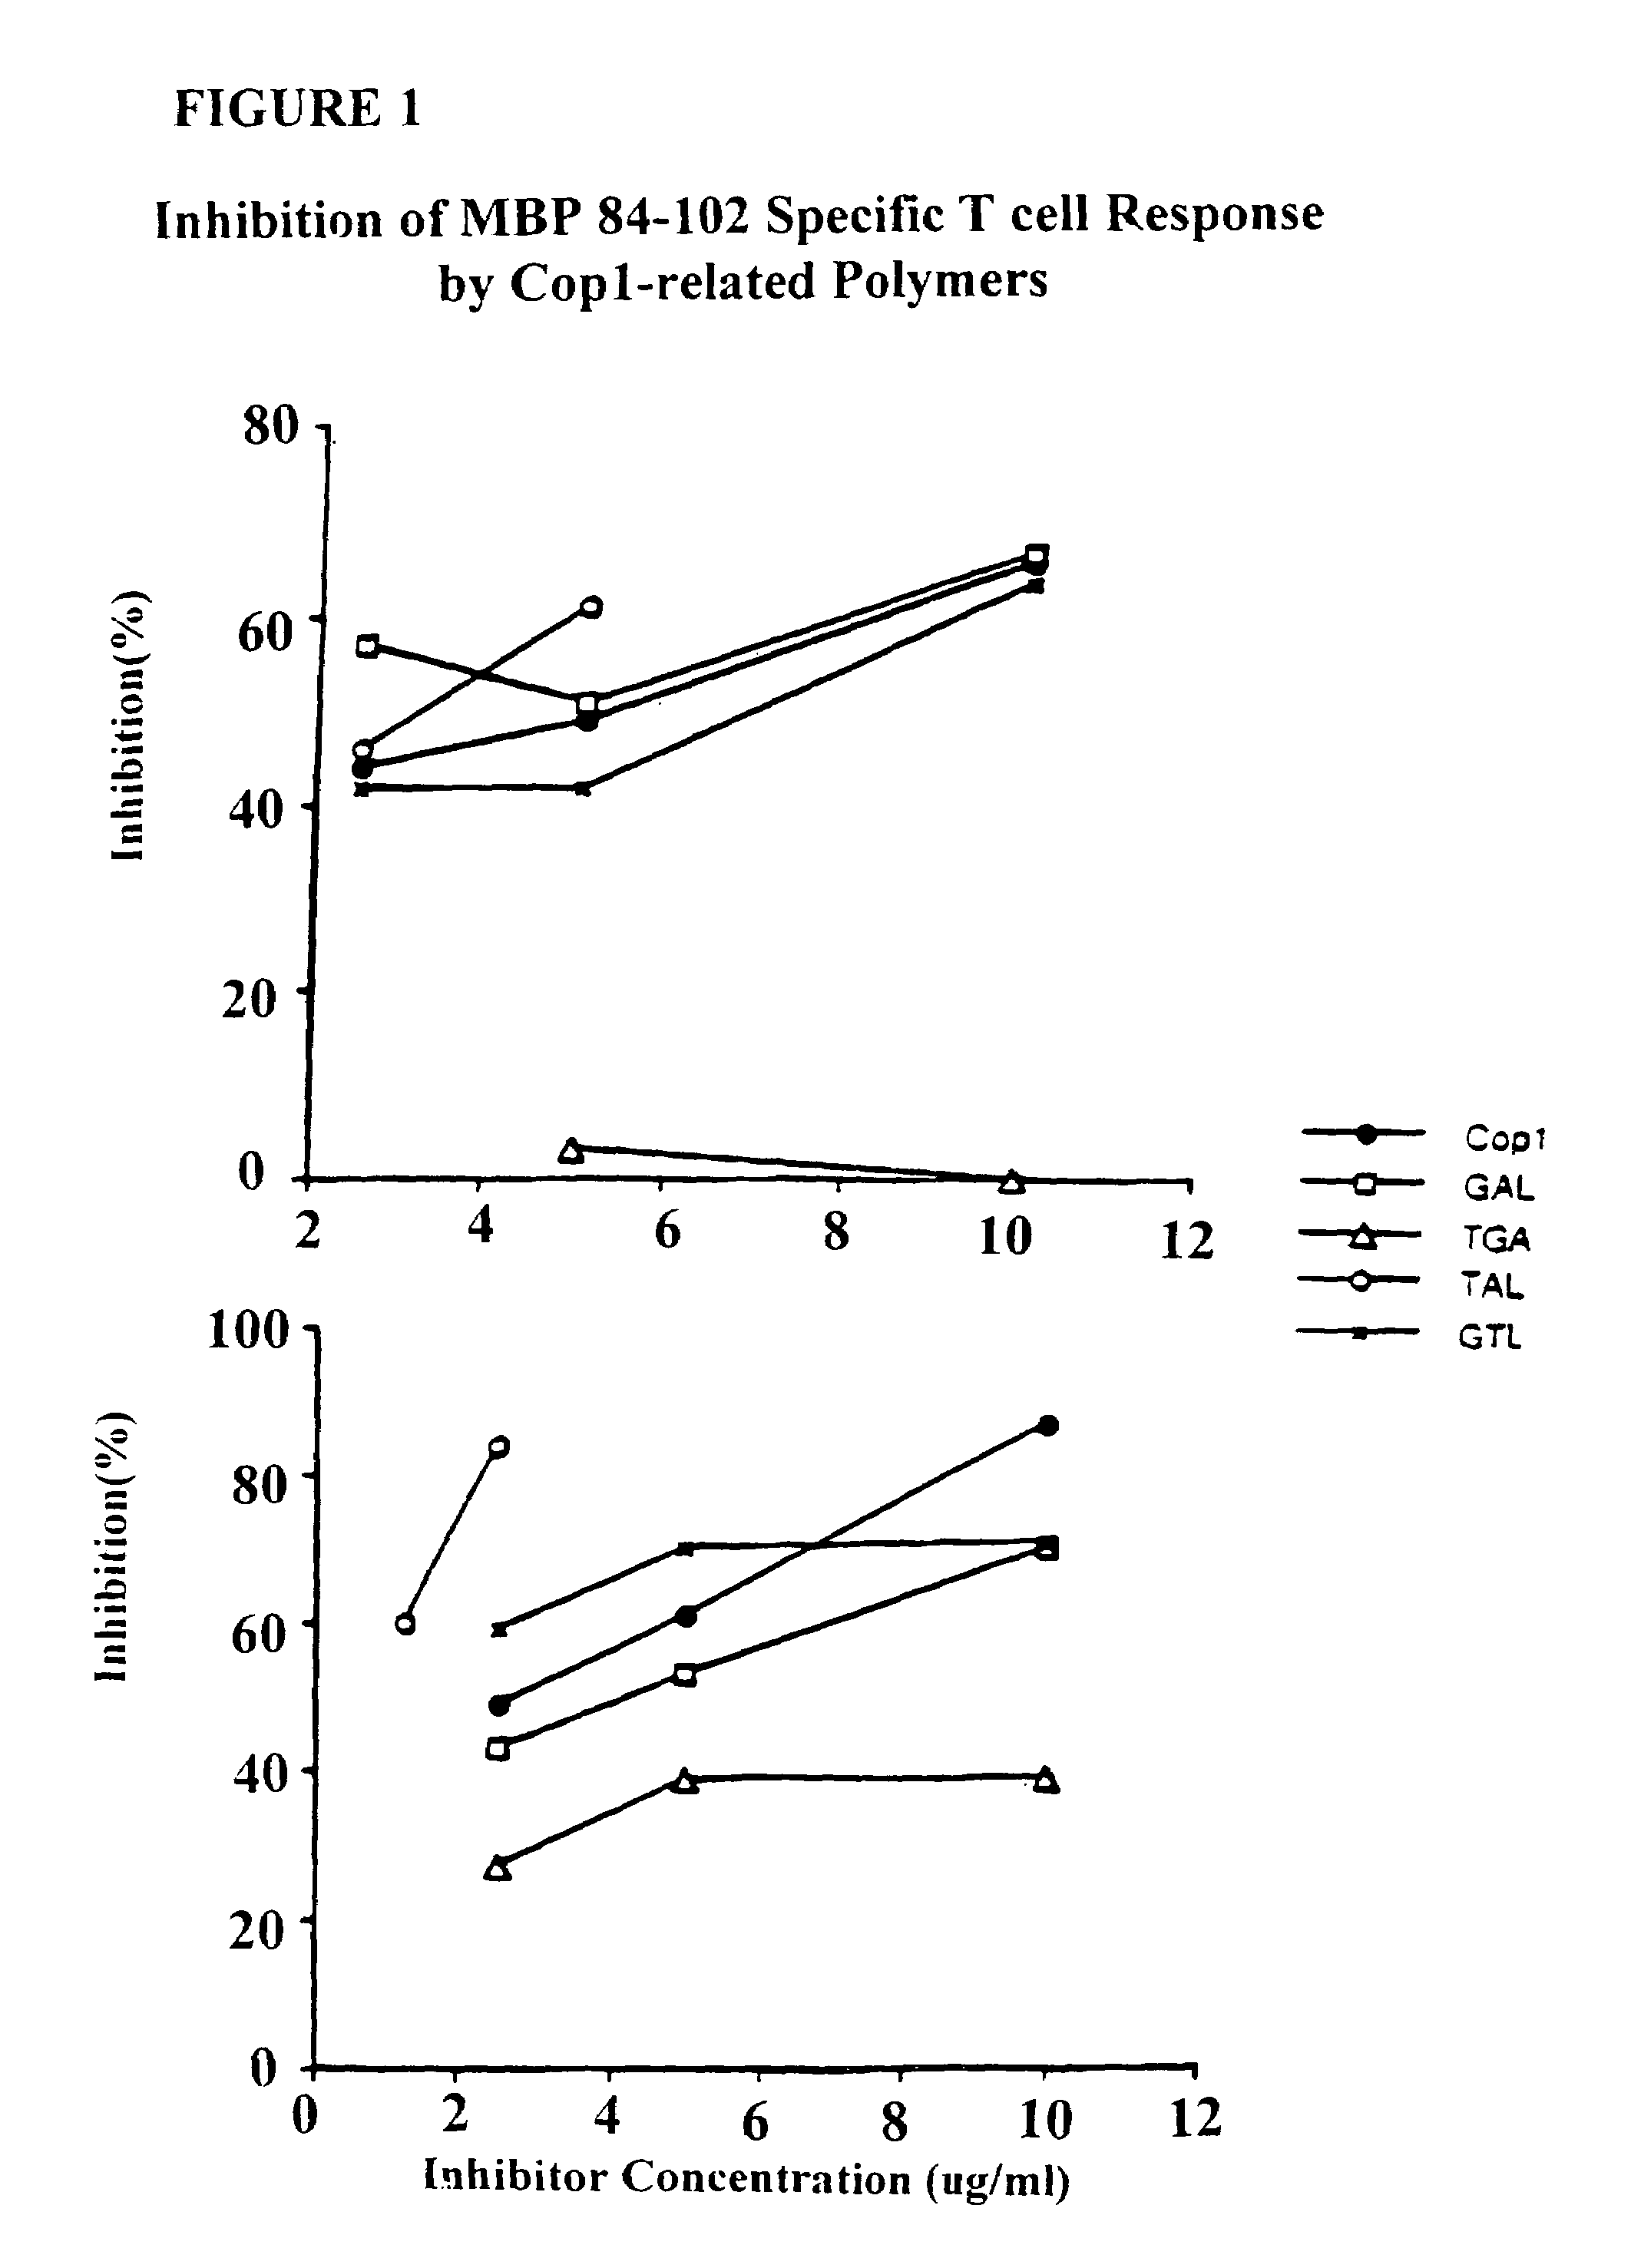 Treatment of autoimmune conditions with Copolymer 1 and related Copolymers